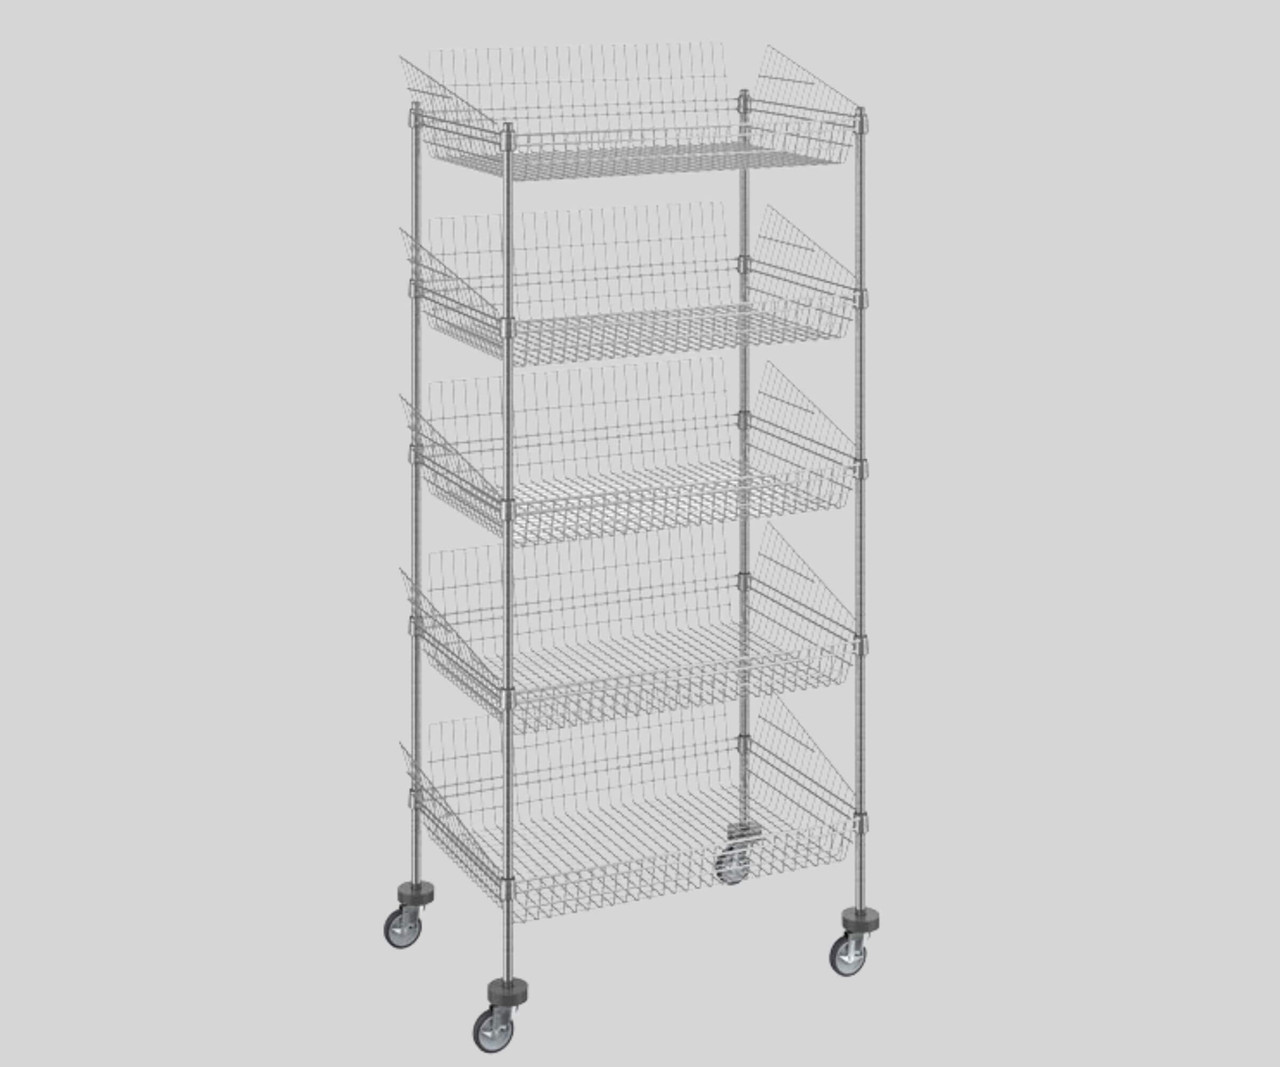 Chicken Pieces CP 24" x 36" x 80" NSF Chrome Mobile 5 Basket Retail Storage Display Stand - Elevate Your Store's Presentation